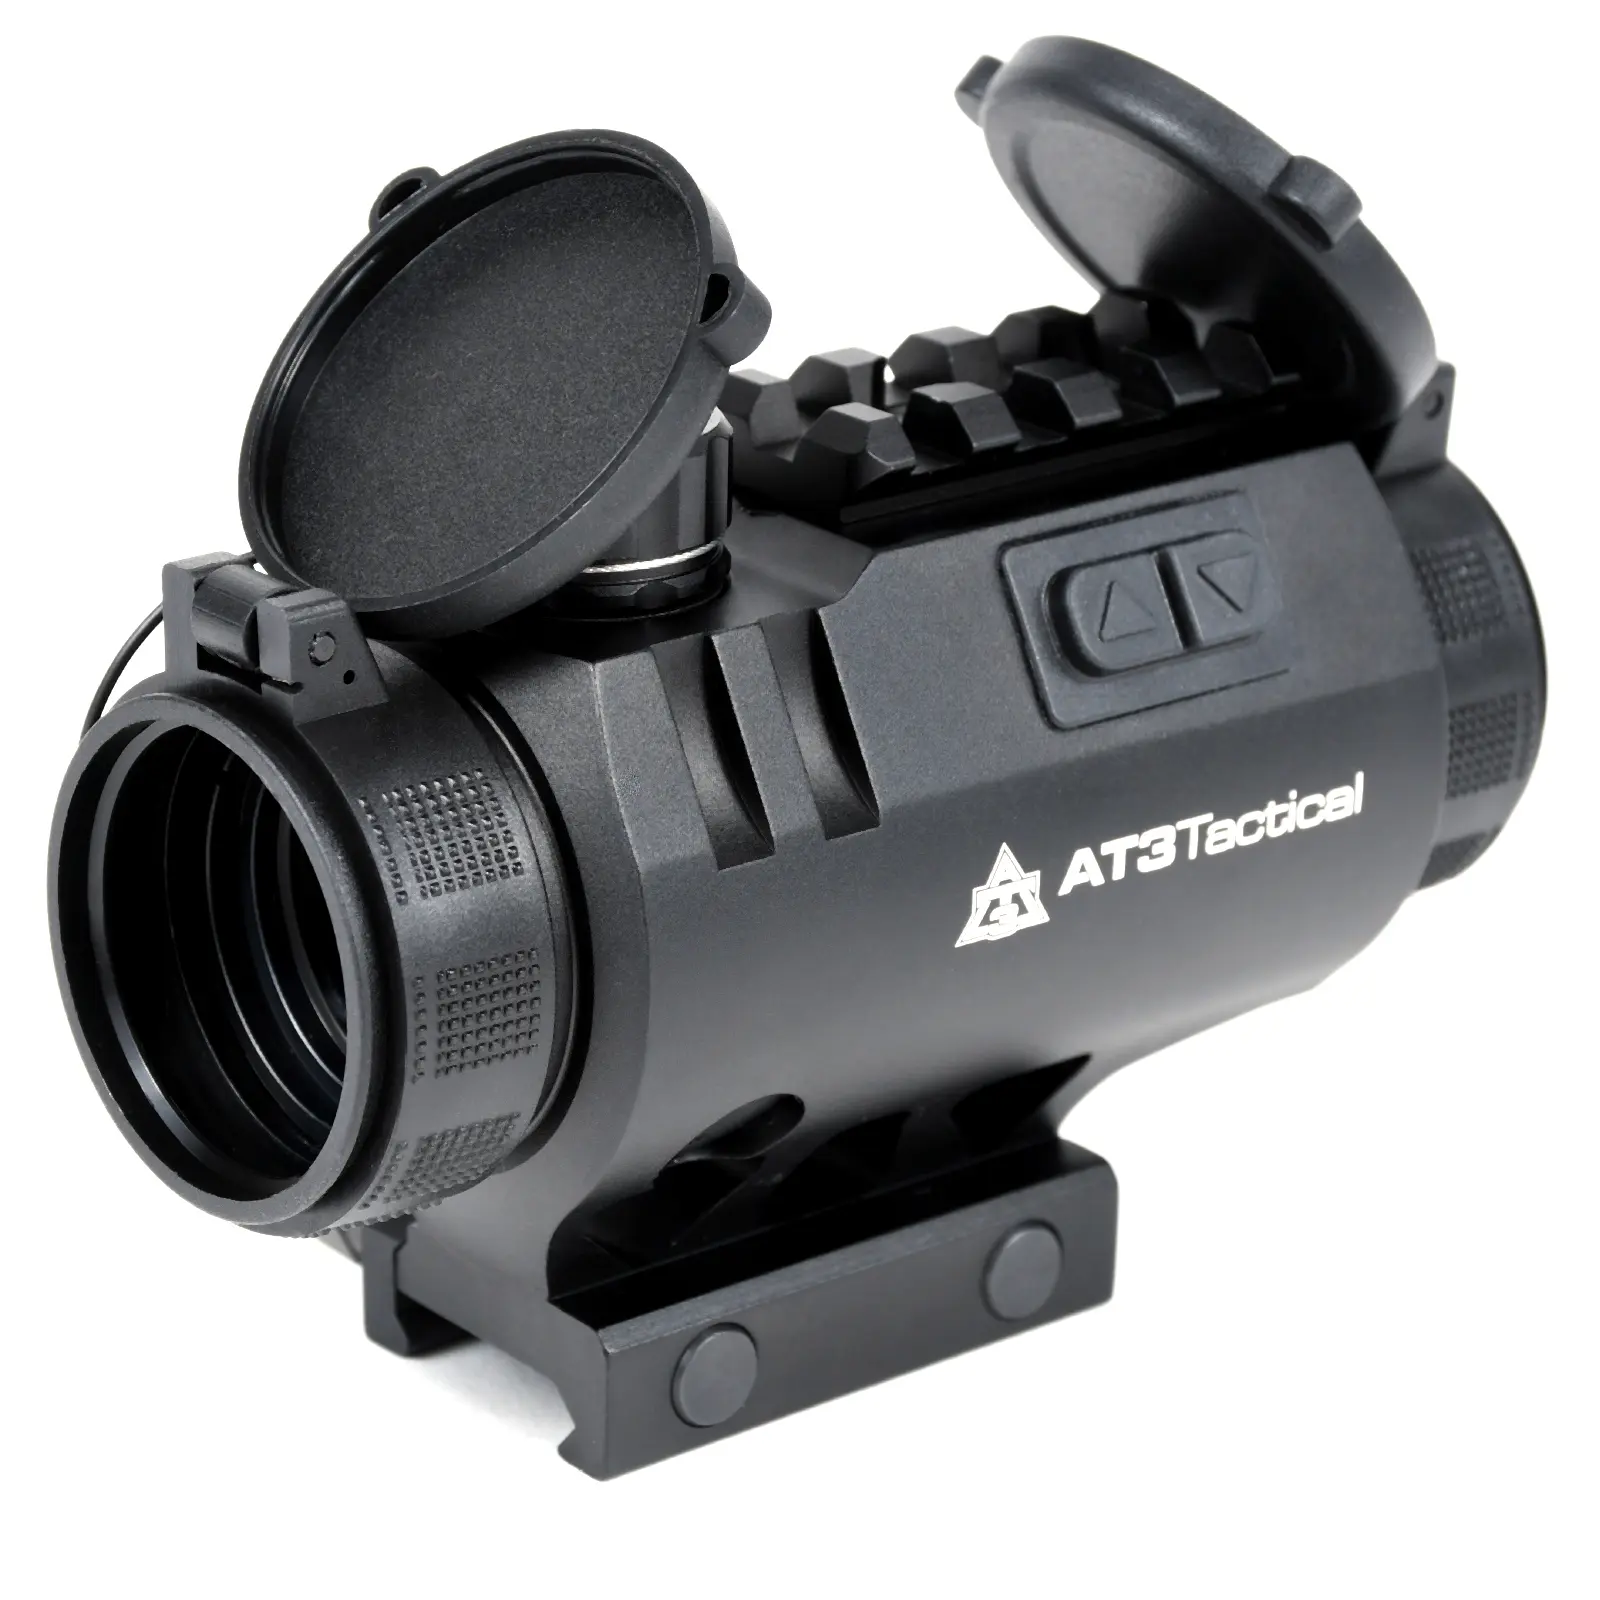 AT3™ 3xP Scope – 3x Prism Scope with Illuminated BDC Reticle